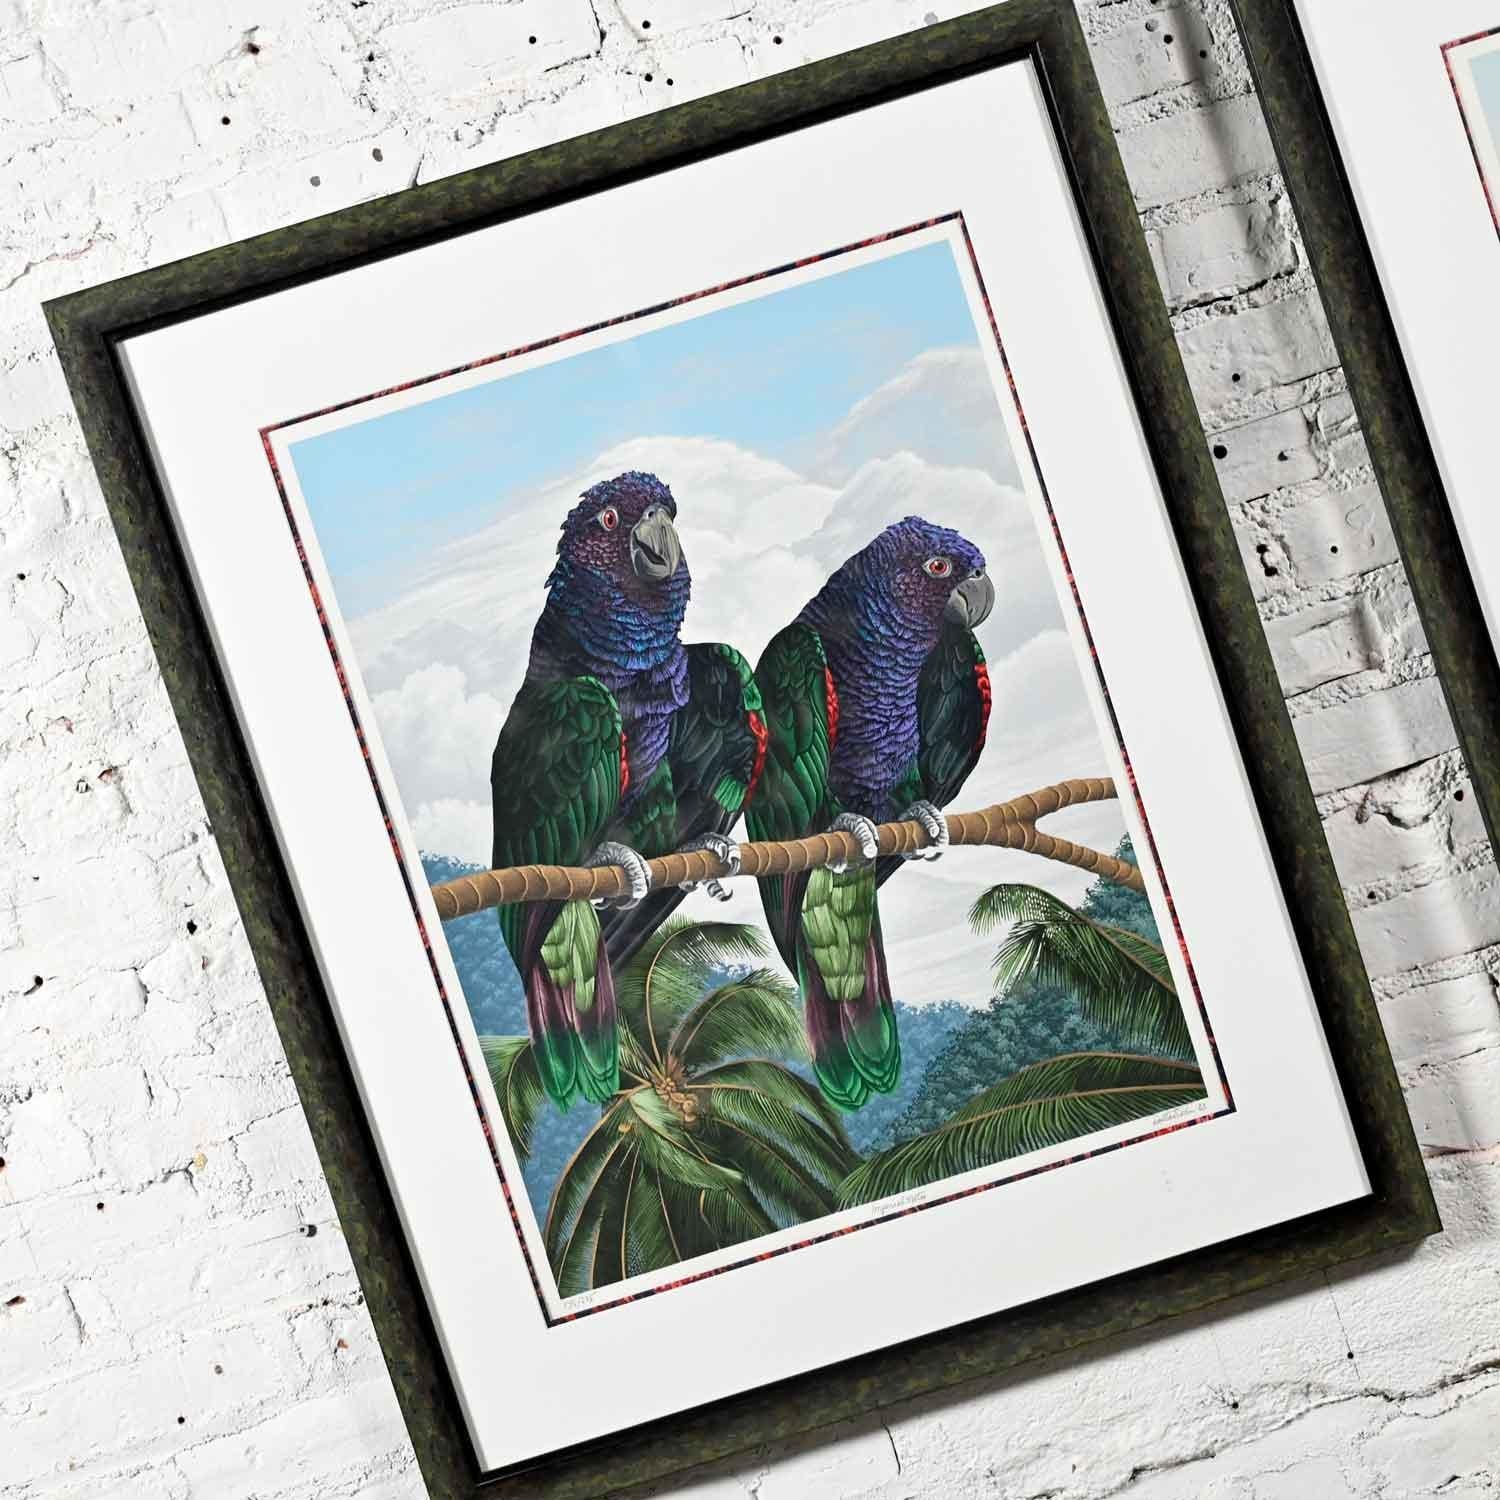 Dallas John Limited Edition Signed Imperial Mates & Military Macaws Serigraph For Sale 4